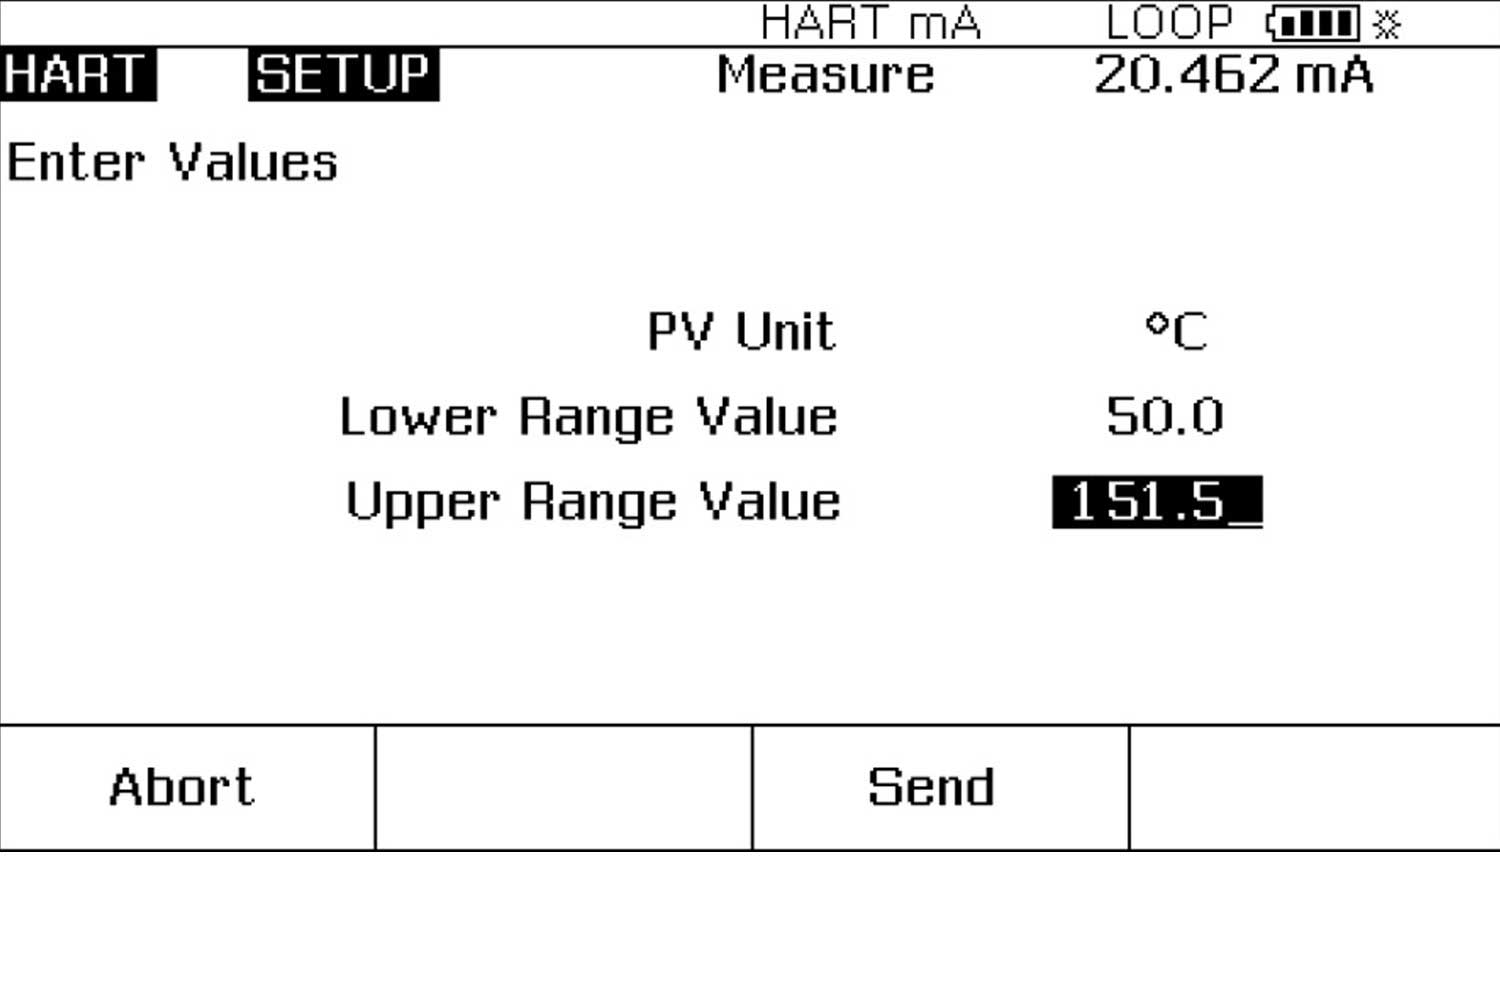 Documenting Process Calibrator Screen Showing Shifting URV or LRV to Transmitter Values